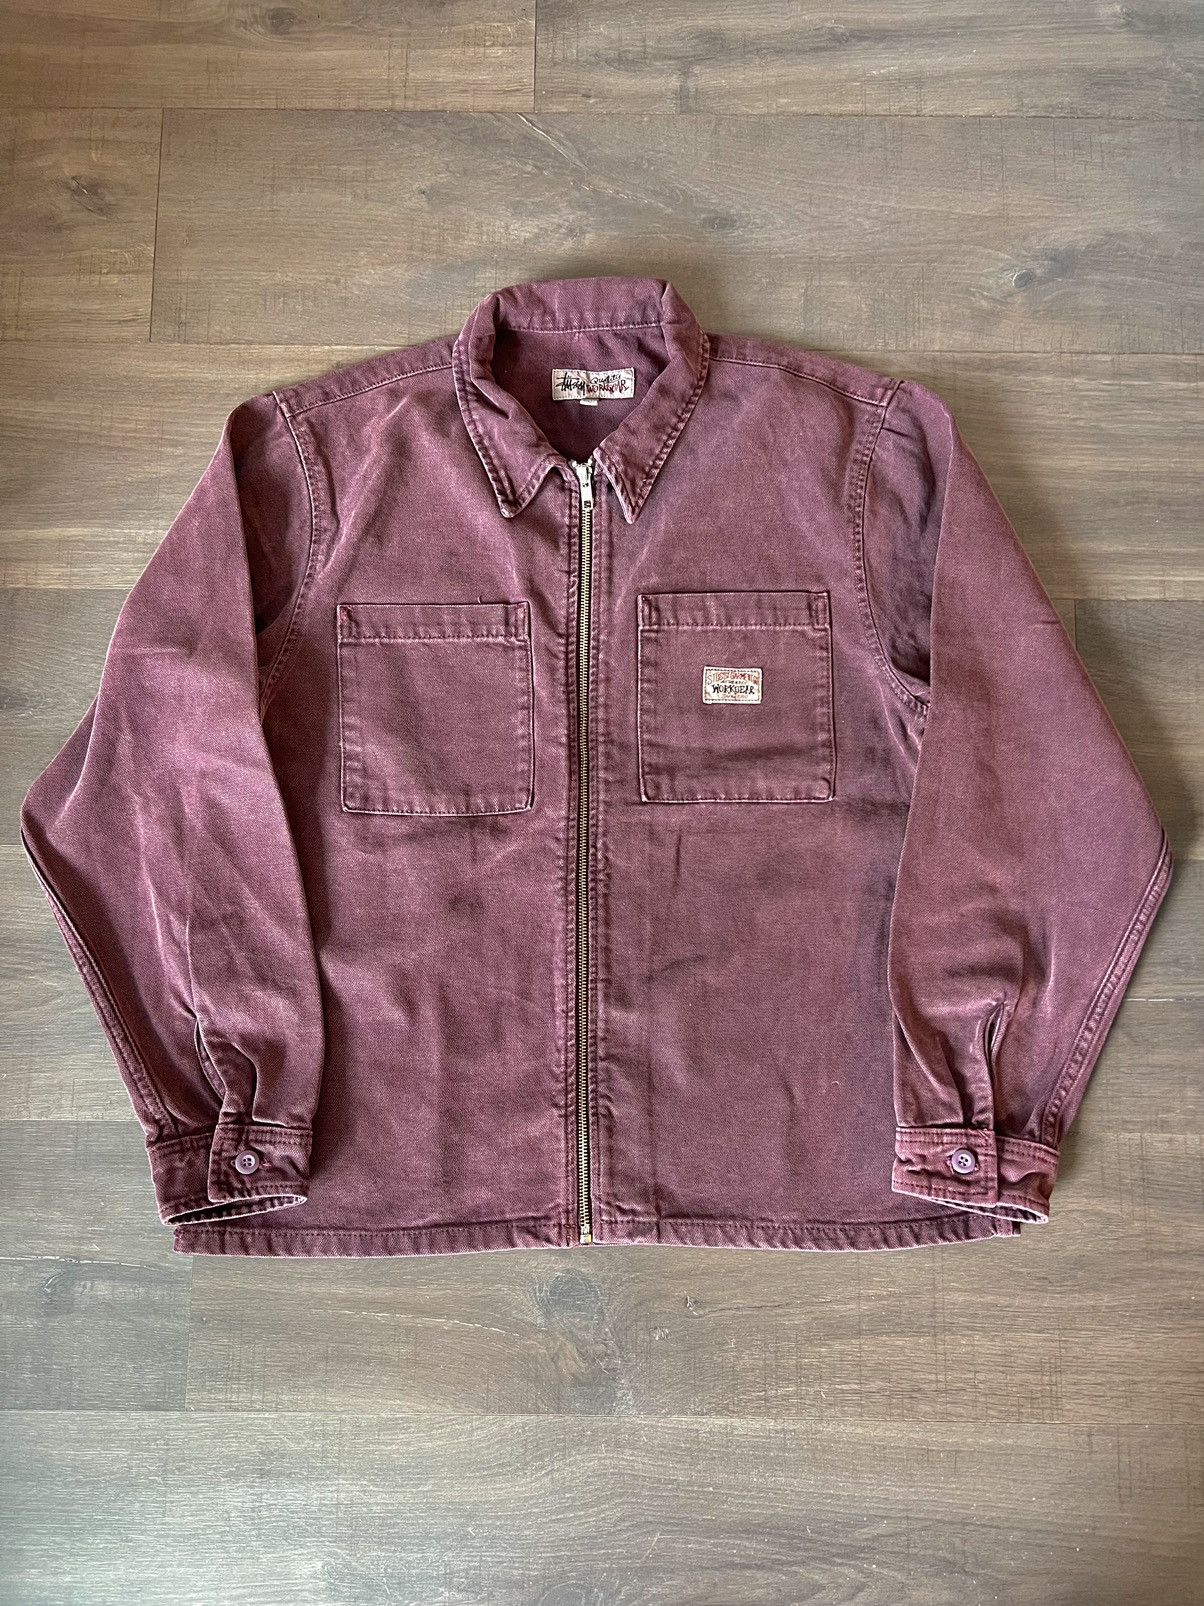 Stussy Stüssy Washed Canvas Zip Shirt Purple Small | Grailed